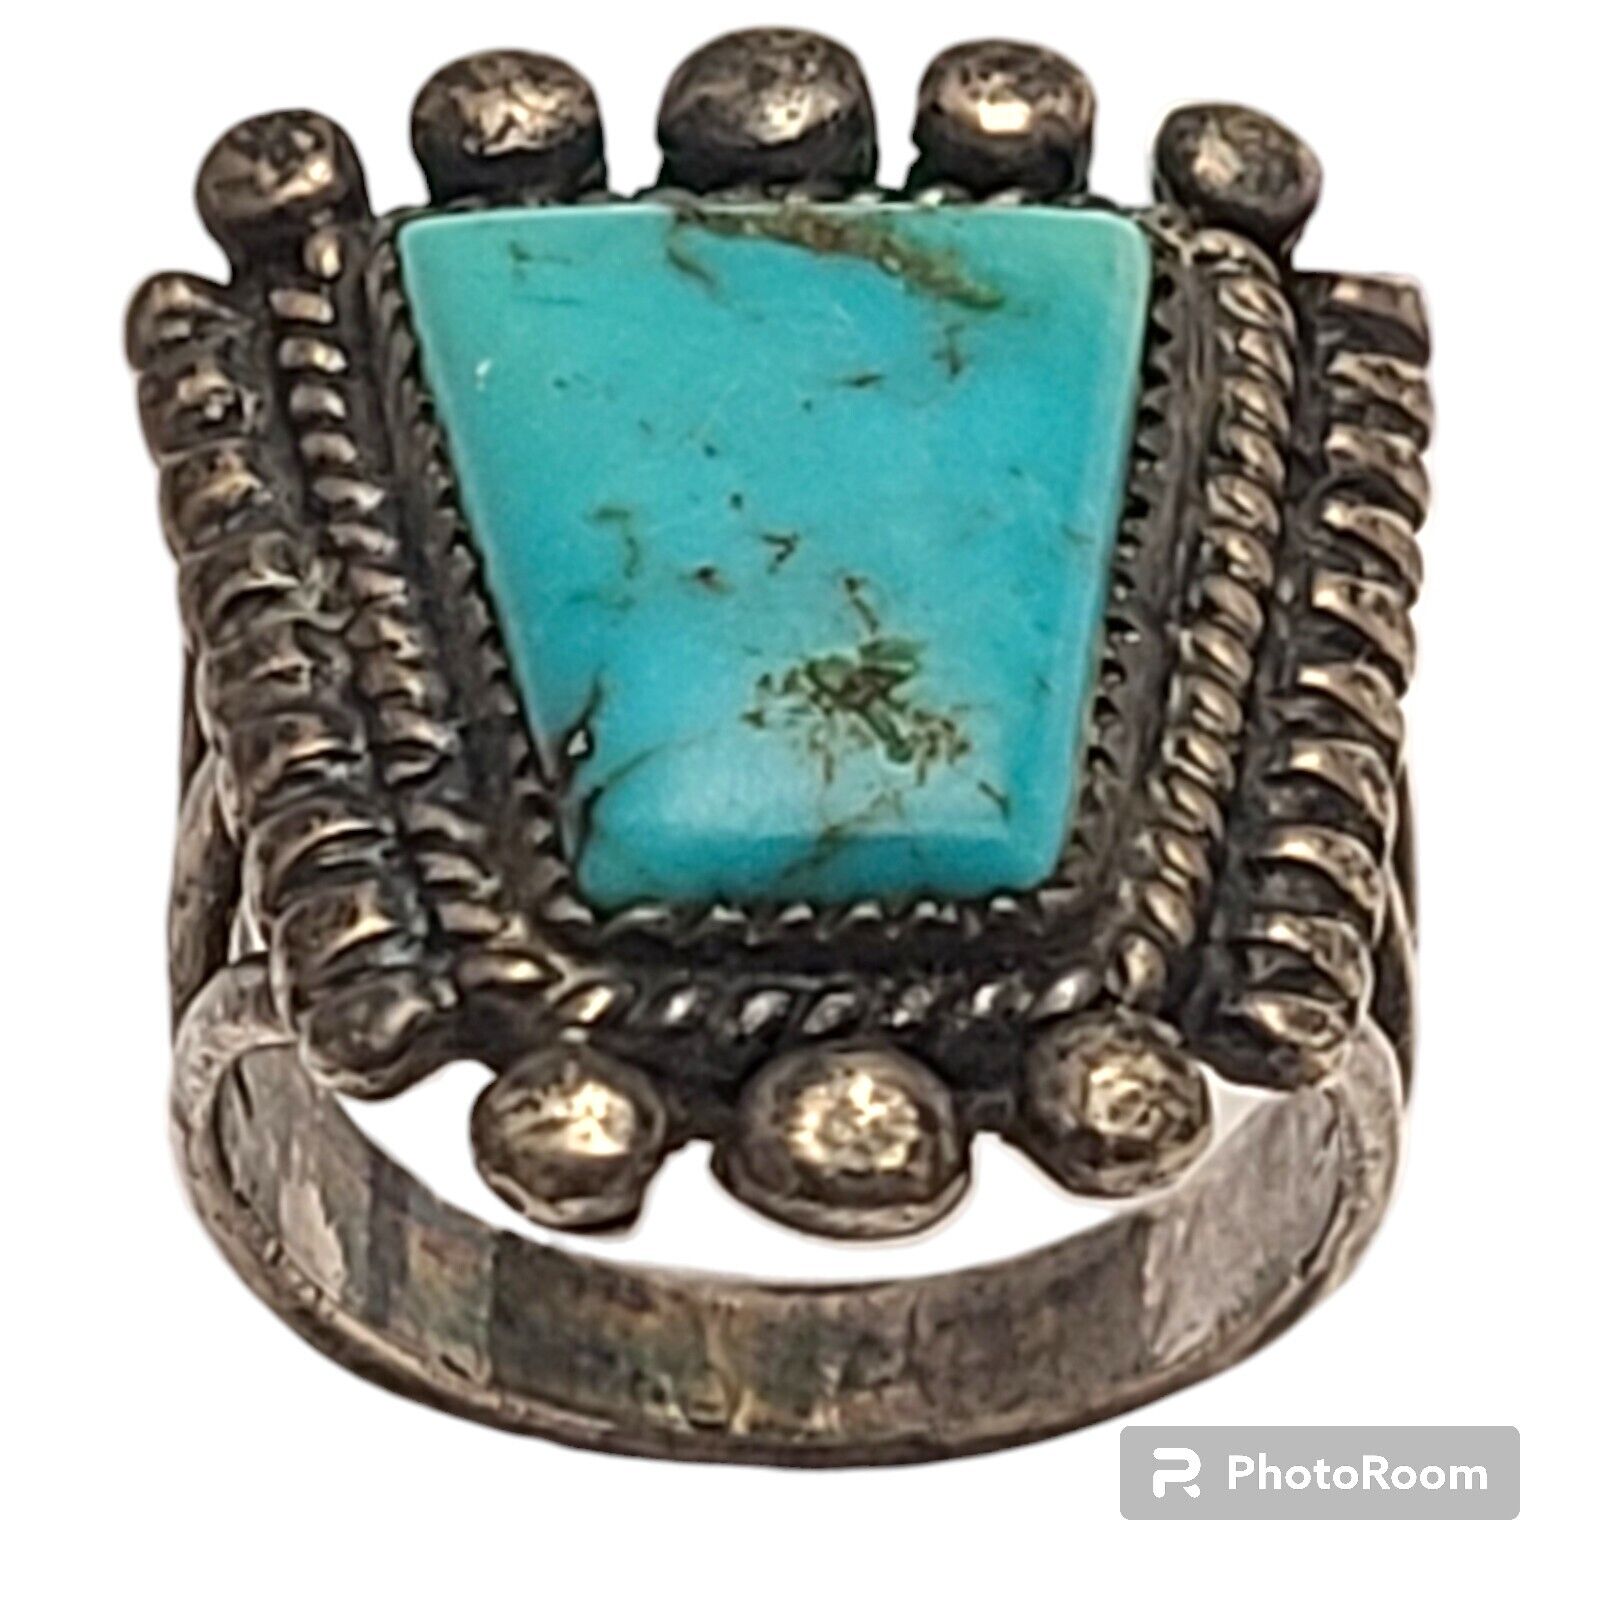  Rare Old Navajo Silver Ring with Blue Gem Turquoise, c. 1940s Size 6.20